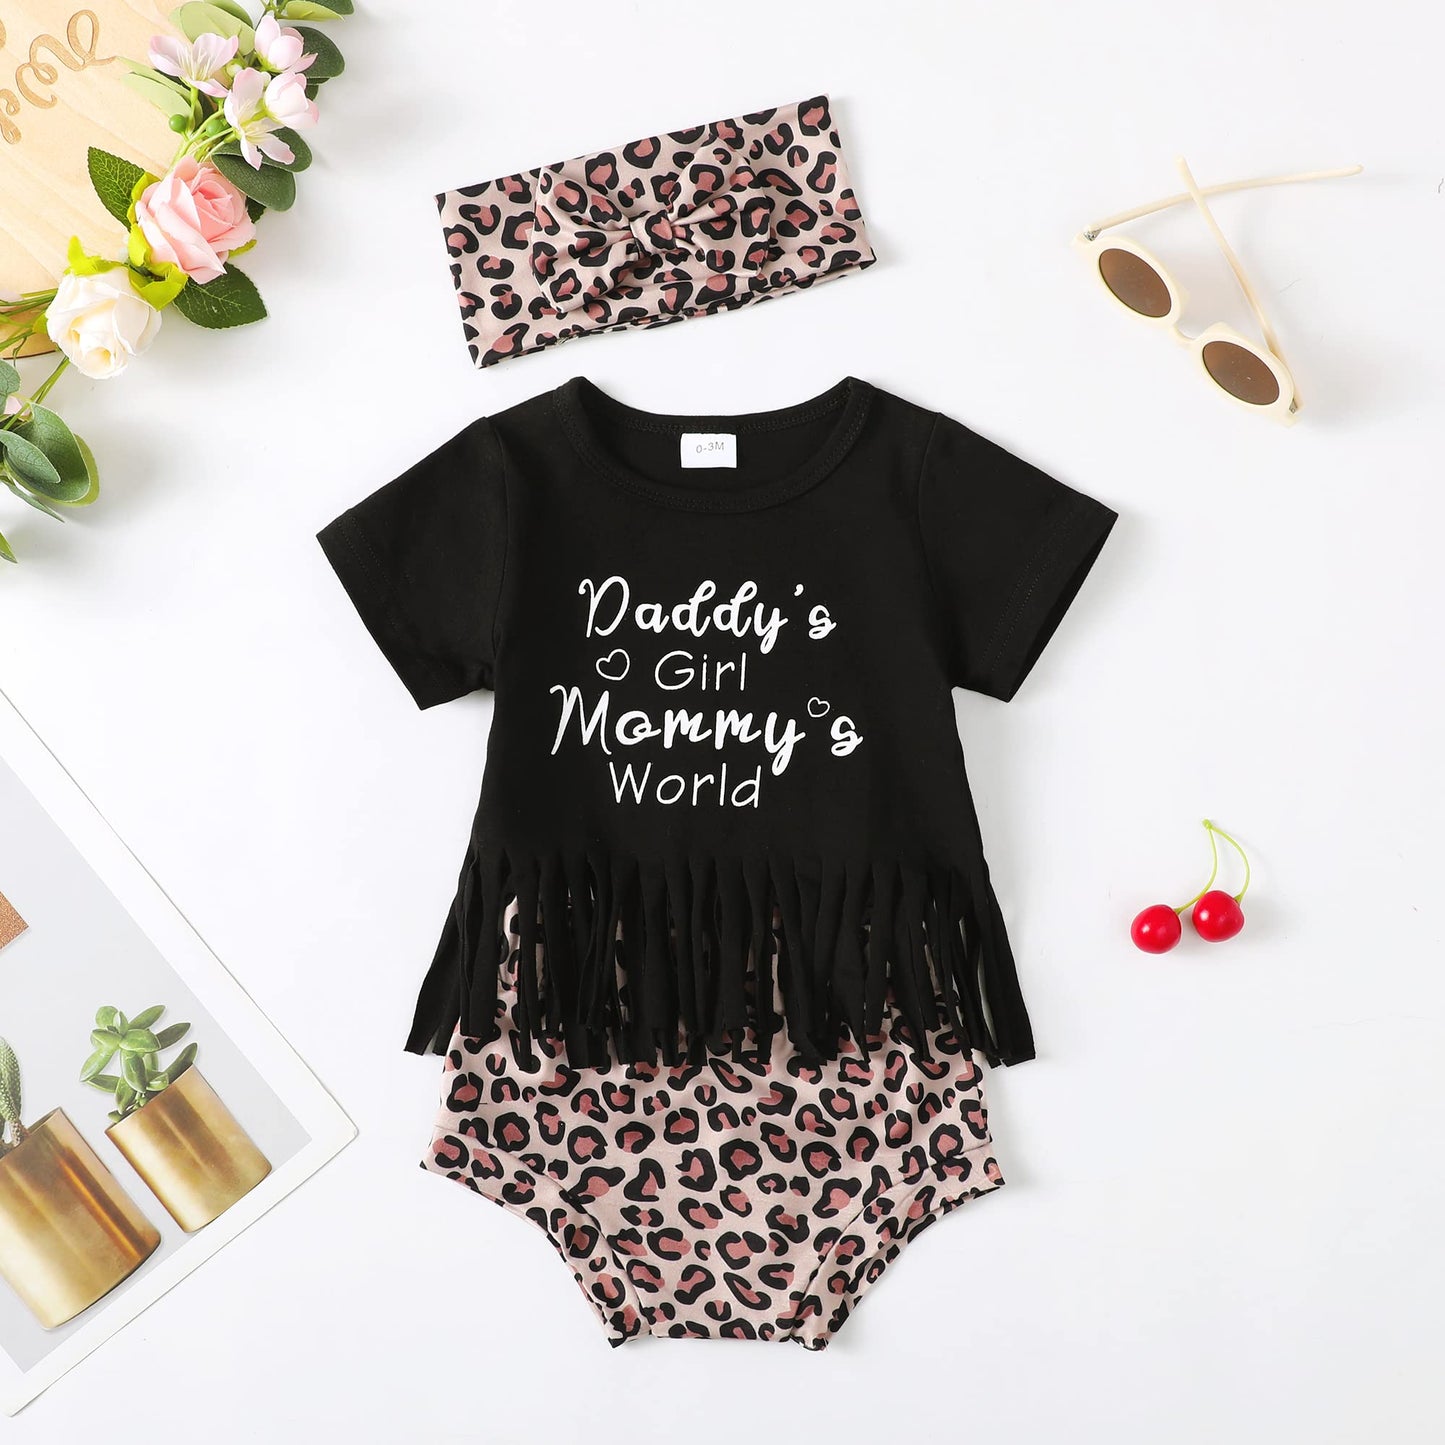 Newborn Baby Girl Clothes Cute Infant Baby Girl Outfit Infant Top Shorts Set Summer Baby Clothes for Girl (0-3 Months)